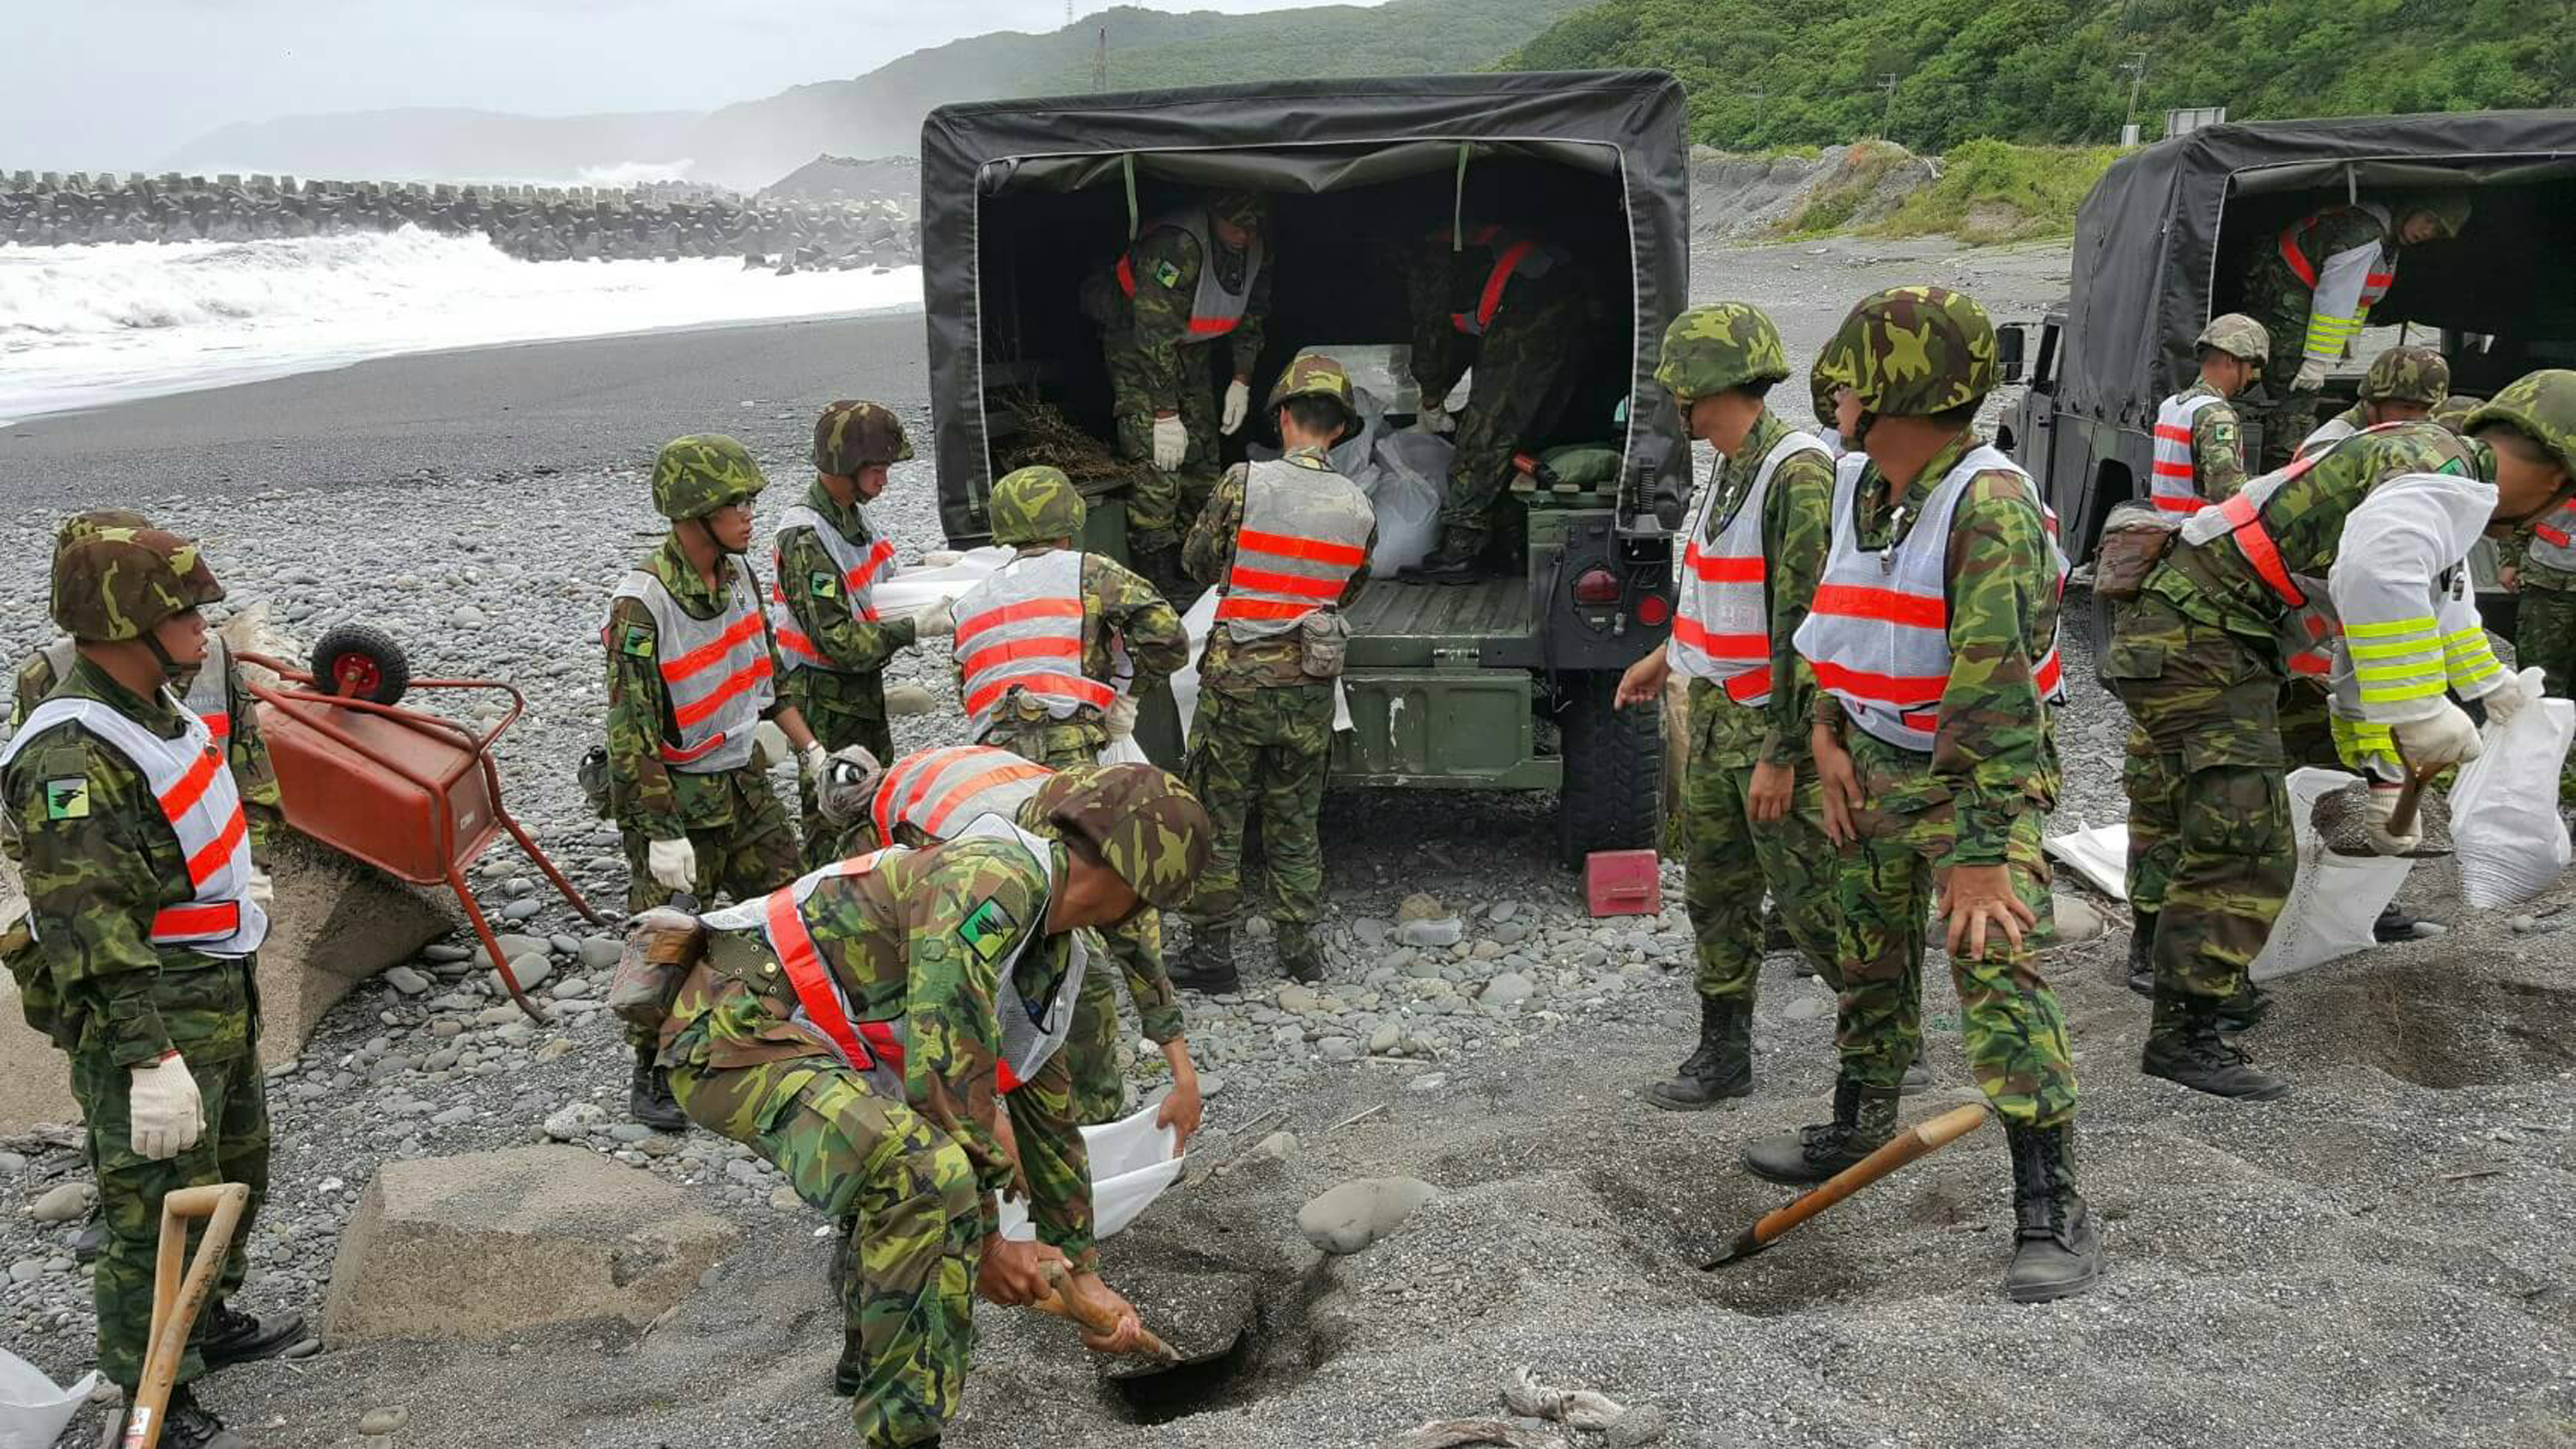 This handout photo taken by the Taiwan Military and released by CNA Photo on July 7, 2016 shows military units in the eastern county of Hualien preparing sandbags on a beach as weather forecasters warn of torrential rains and fierce winds from approaching Super Typhoon Nepartak. Taiwan cancelled more than 100 flights and shut schools and offices on July 7 as the island braced for a direct hit from Super Typhoon Nepartak, the first major tropical storm of the season. / AFP PHOTO / CNA PHOTO / Taiwan Military /  - Taiwan OUT - China OUT - Hong Kong OUT - Macau OUT / -----EDITORS NOTE --- RESTRICTED TO EDITORIAL USE - MANDATORY CREDIT "AFP PHOTO / CNA PHOTO / Taiwan Military" - NO MARKETING - NO ADVERTISING CAMPAIGNS - DISTRIBUTED AS A SERVICE TO CLIENTS - NO ARCHIVES /